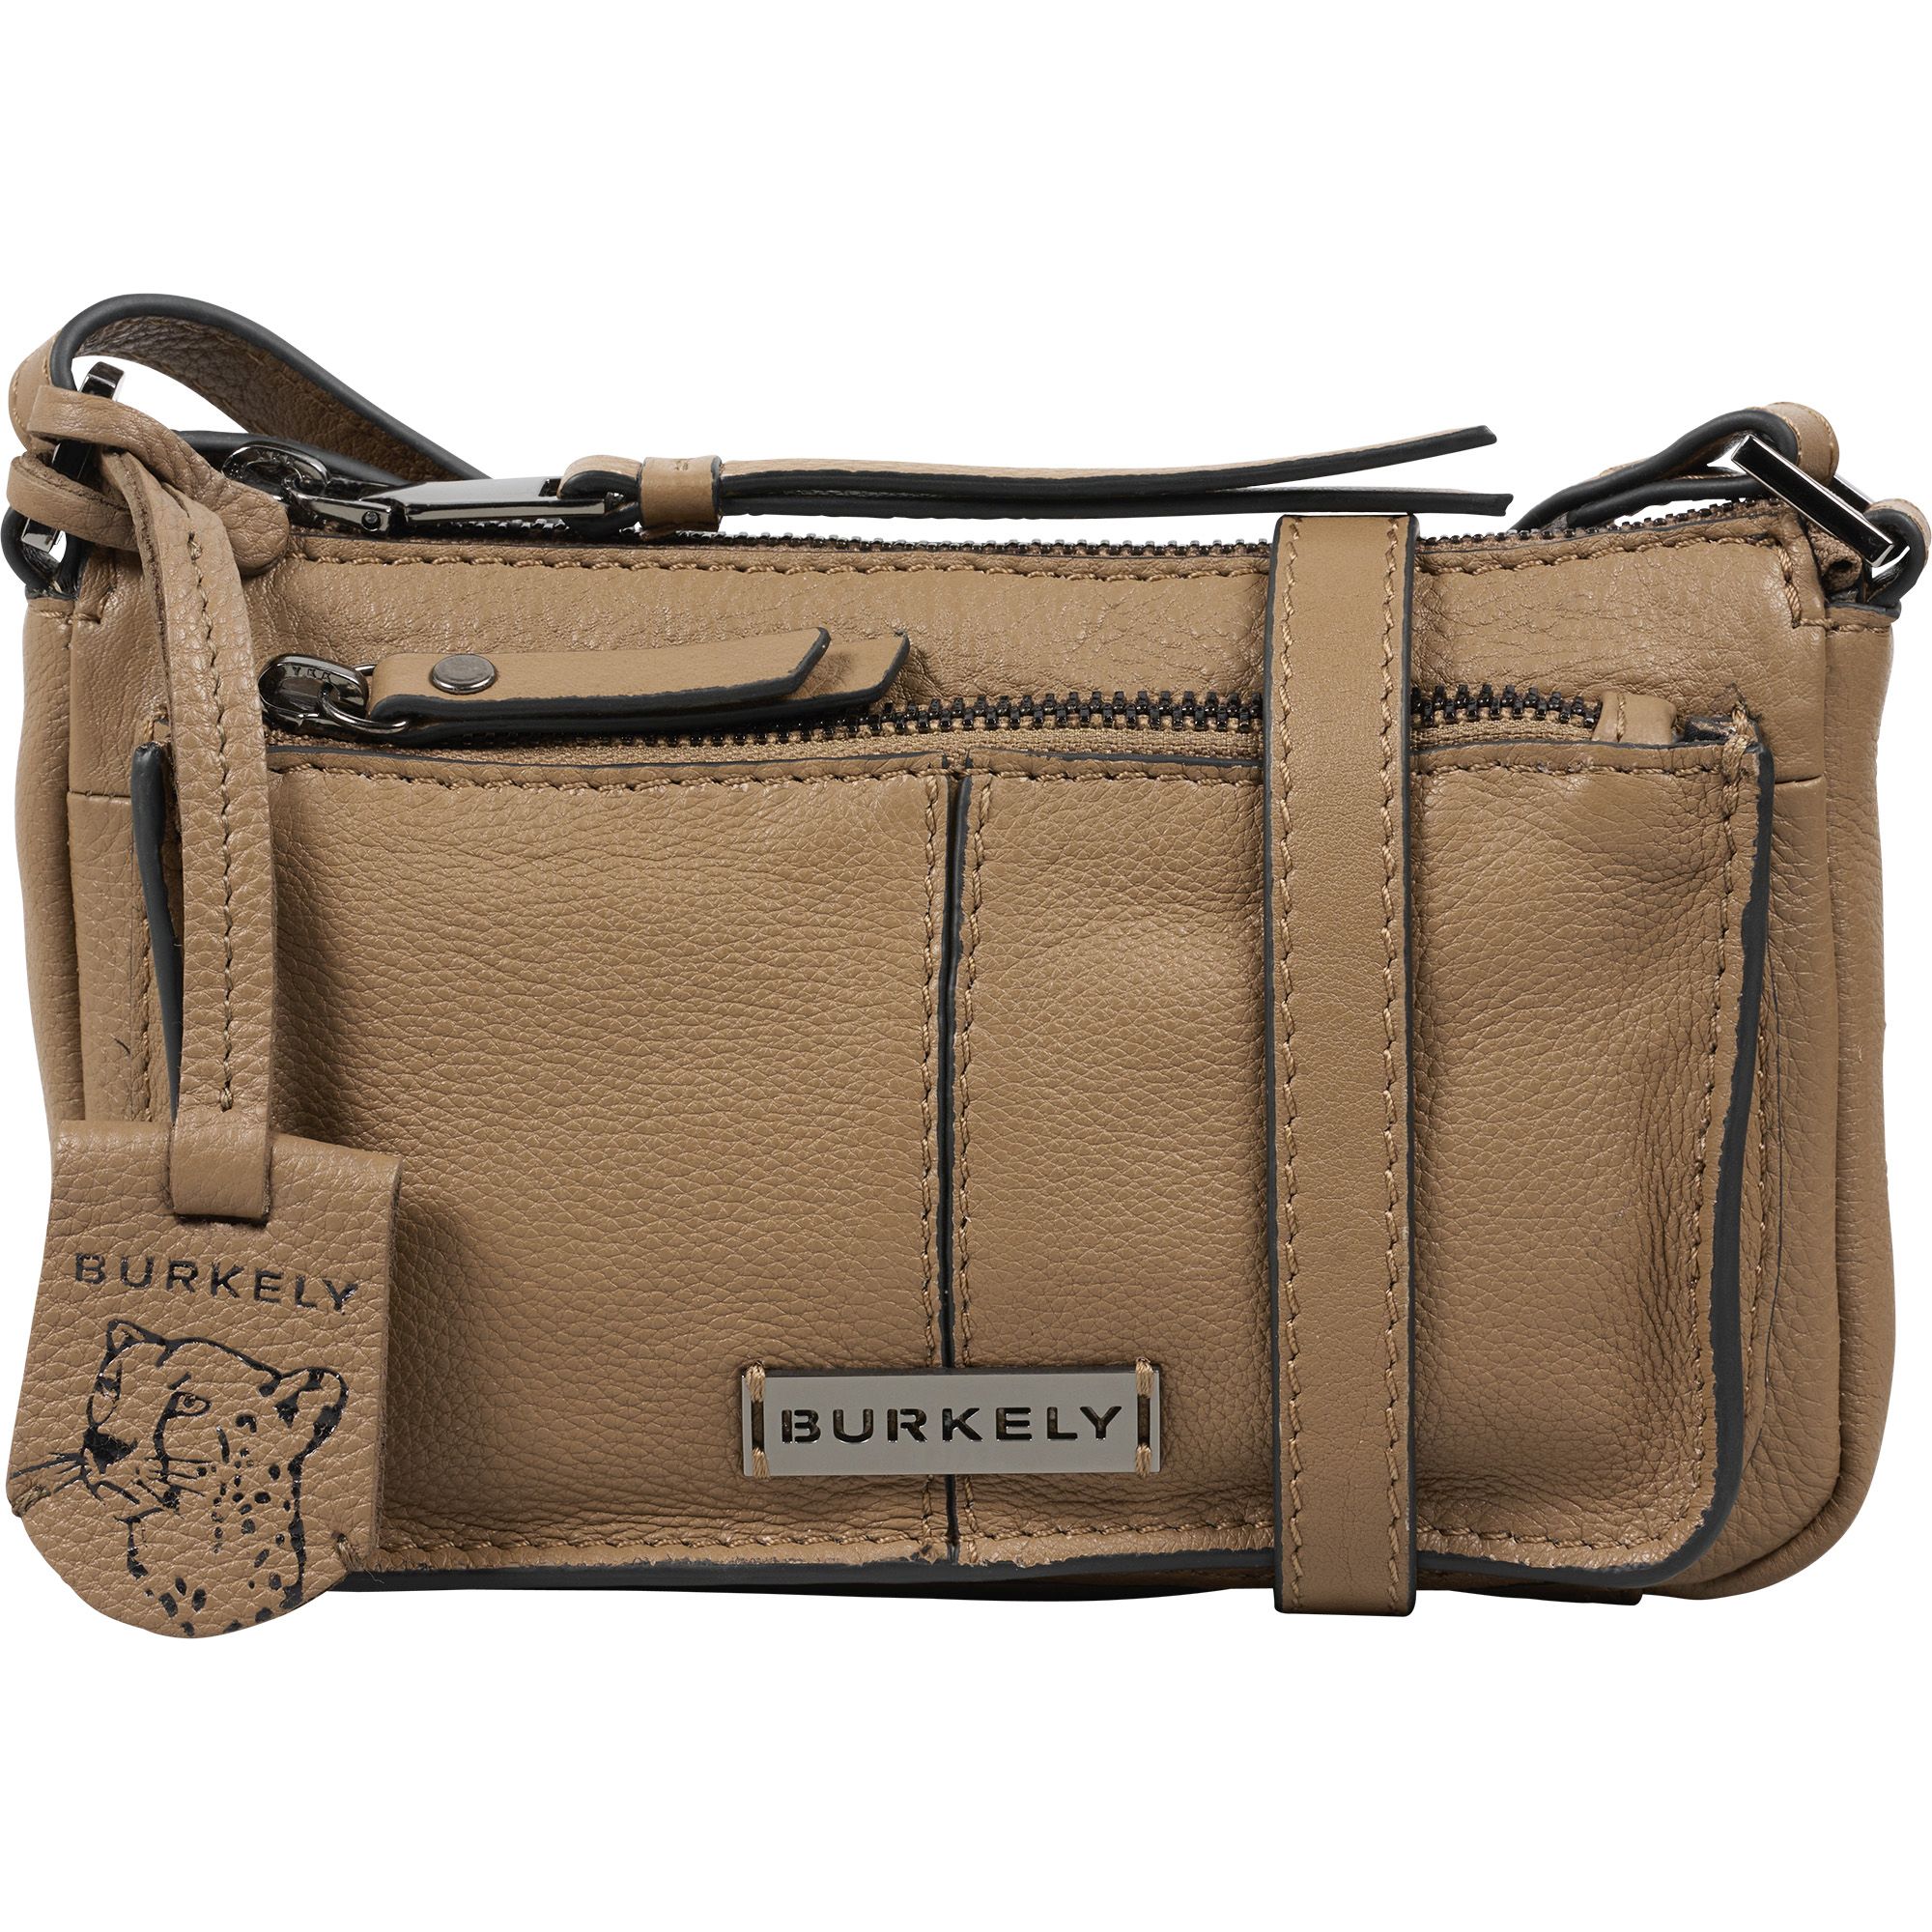 Burkely 1000523 Crossbody bag 38.25 Taupe